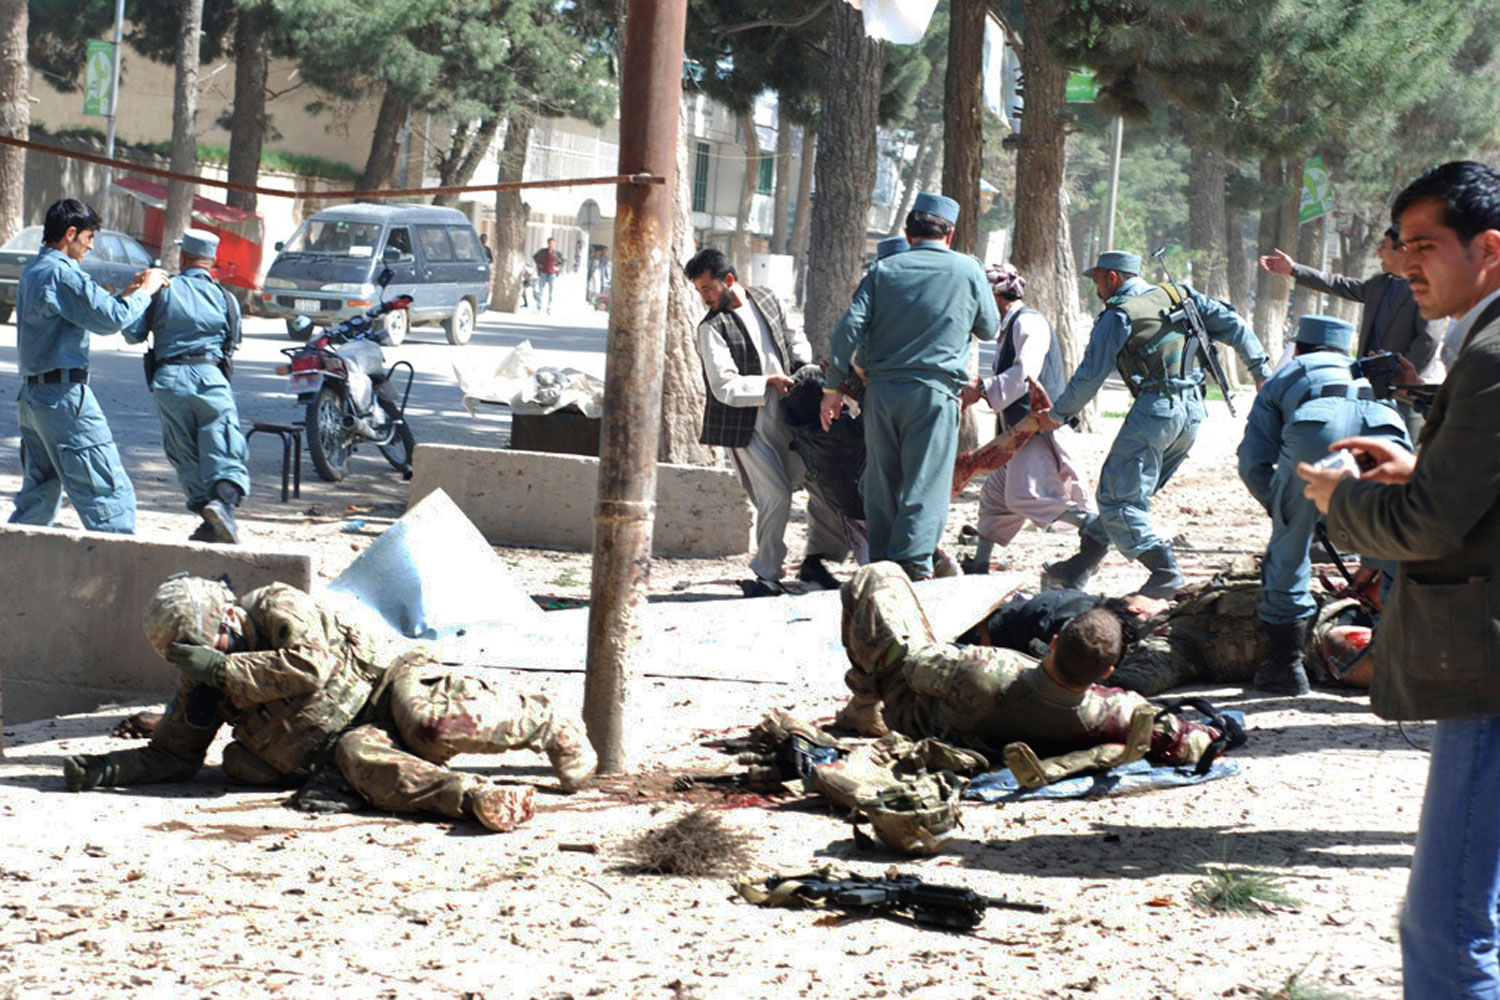 April 4, 2012. Wounded U.S. soldiers lie on the ground at the scene of a suicide attack in Maimanah, the capital of Faryab province north of Kabul, Afghanistan. A suicide bomber blew himself up, killing at least 10 people, including three NATO service members, officials said, the latest in a string of attacks as spring fighting season gets under way. A senior U.S. defense official has confirmed that two U.S. soldiers were among three NATO forces killed in a suicide bombing in northern Afghanistan.